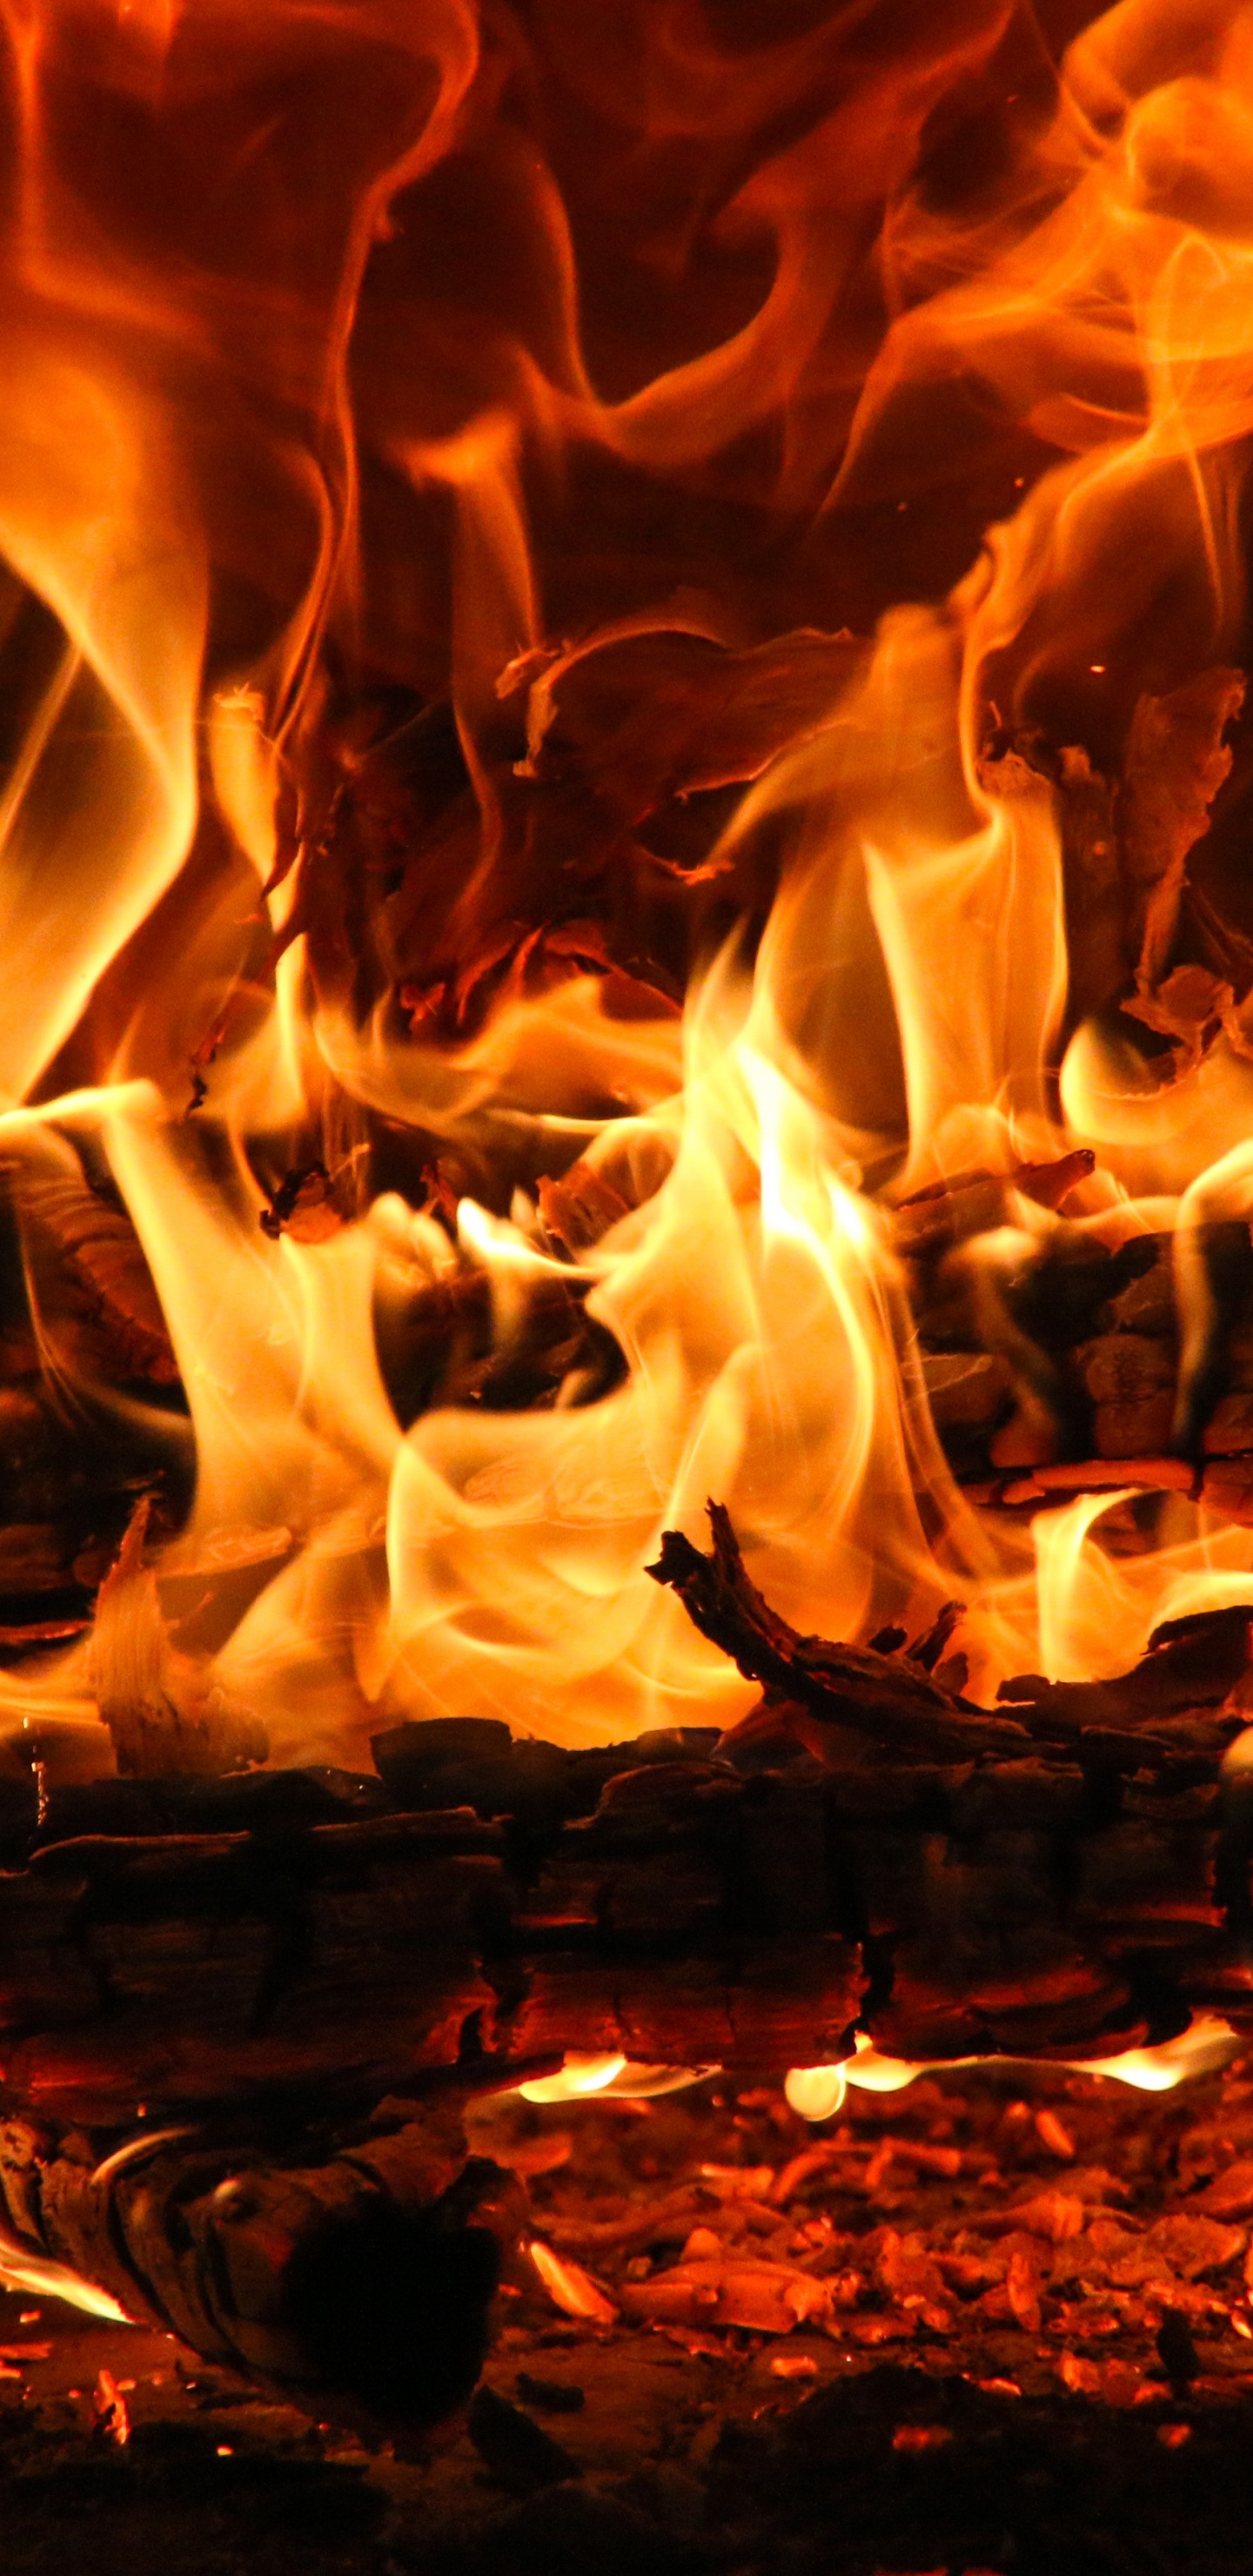 Burning Wood on Brown Soil. Wallpaper in 1440x2960 Resolution